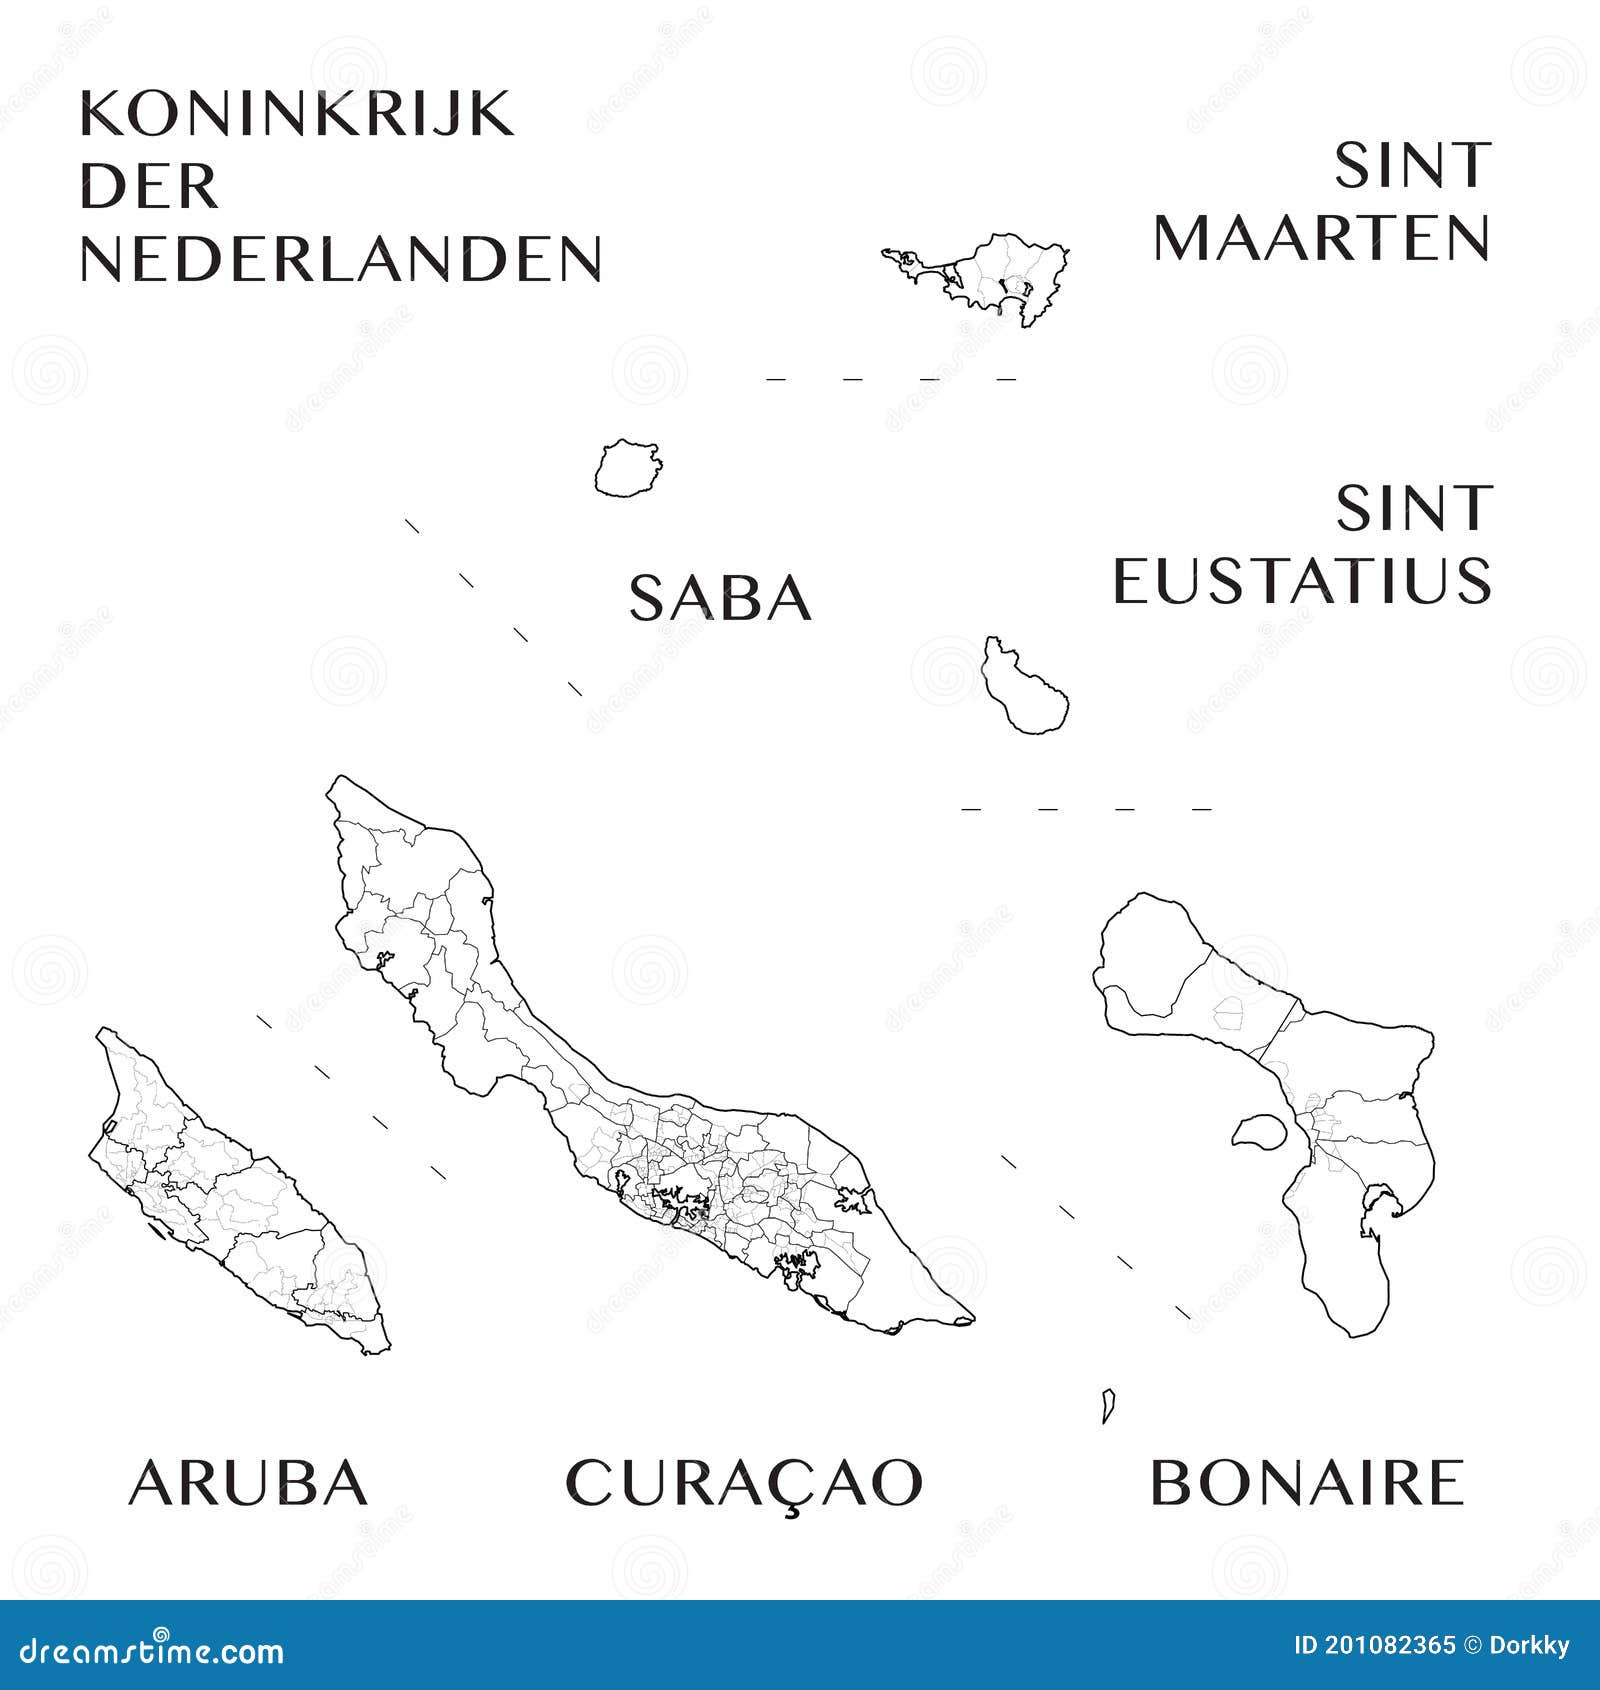  map of the caribbean netherlands and the special municipalities of the kingdom of the netherlands